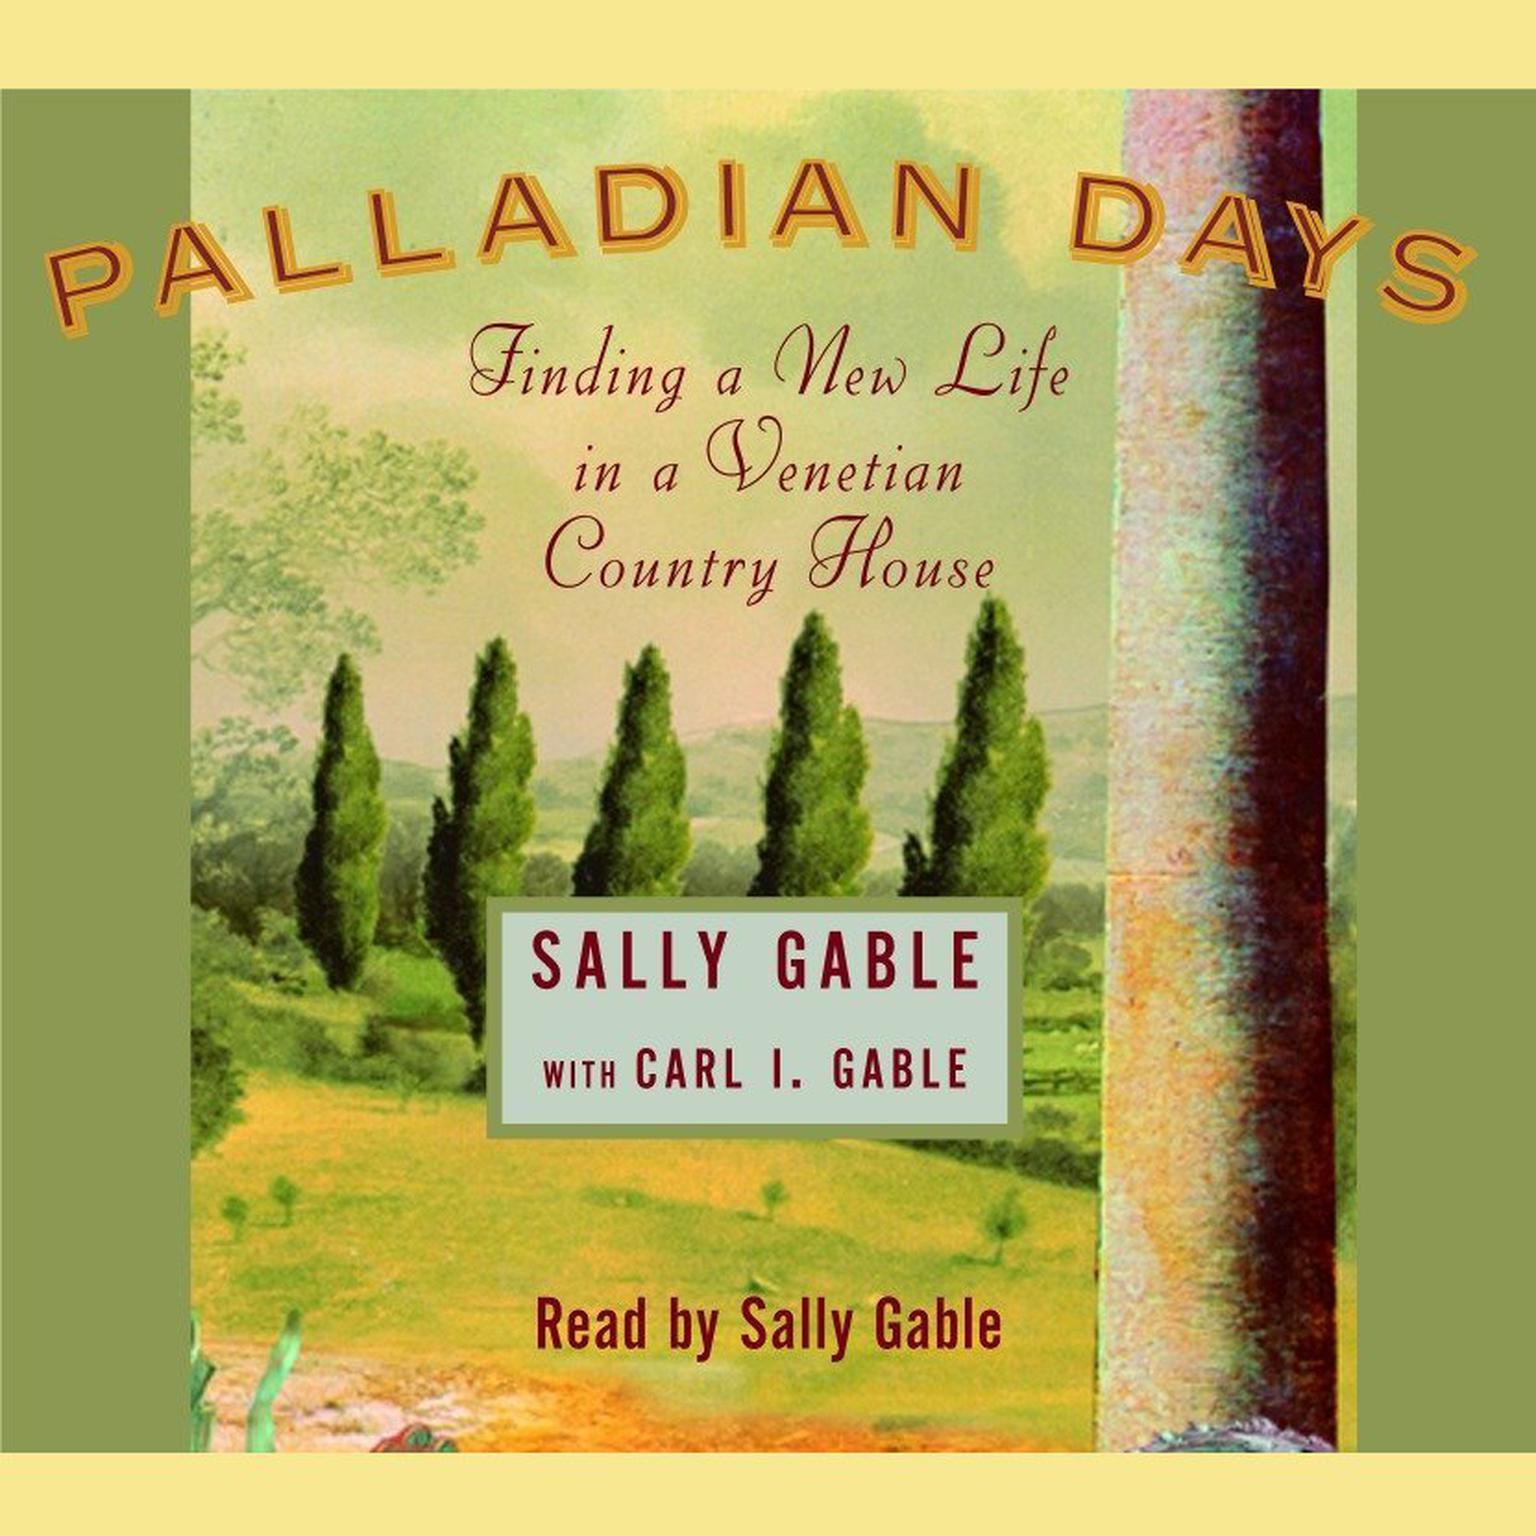 Palladian Days (Abridged): Finding a New Life in a Venetian Country House Audiobook, by Sally Gable